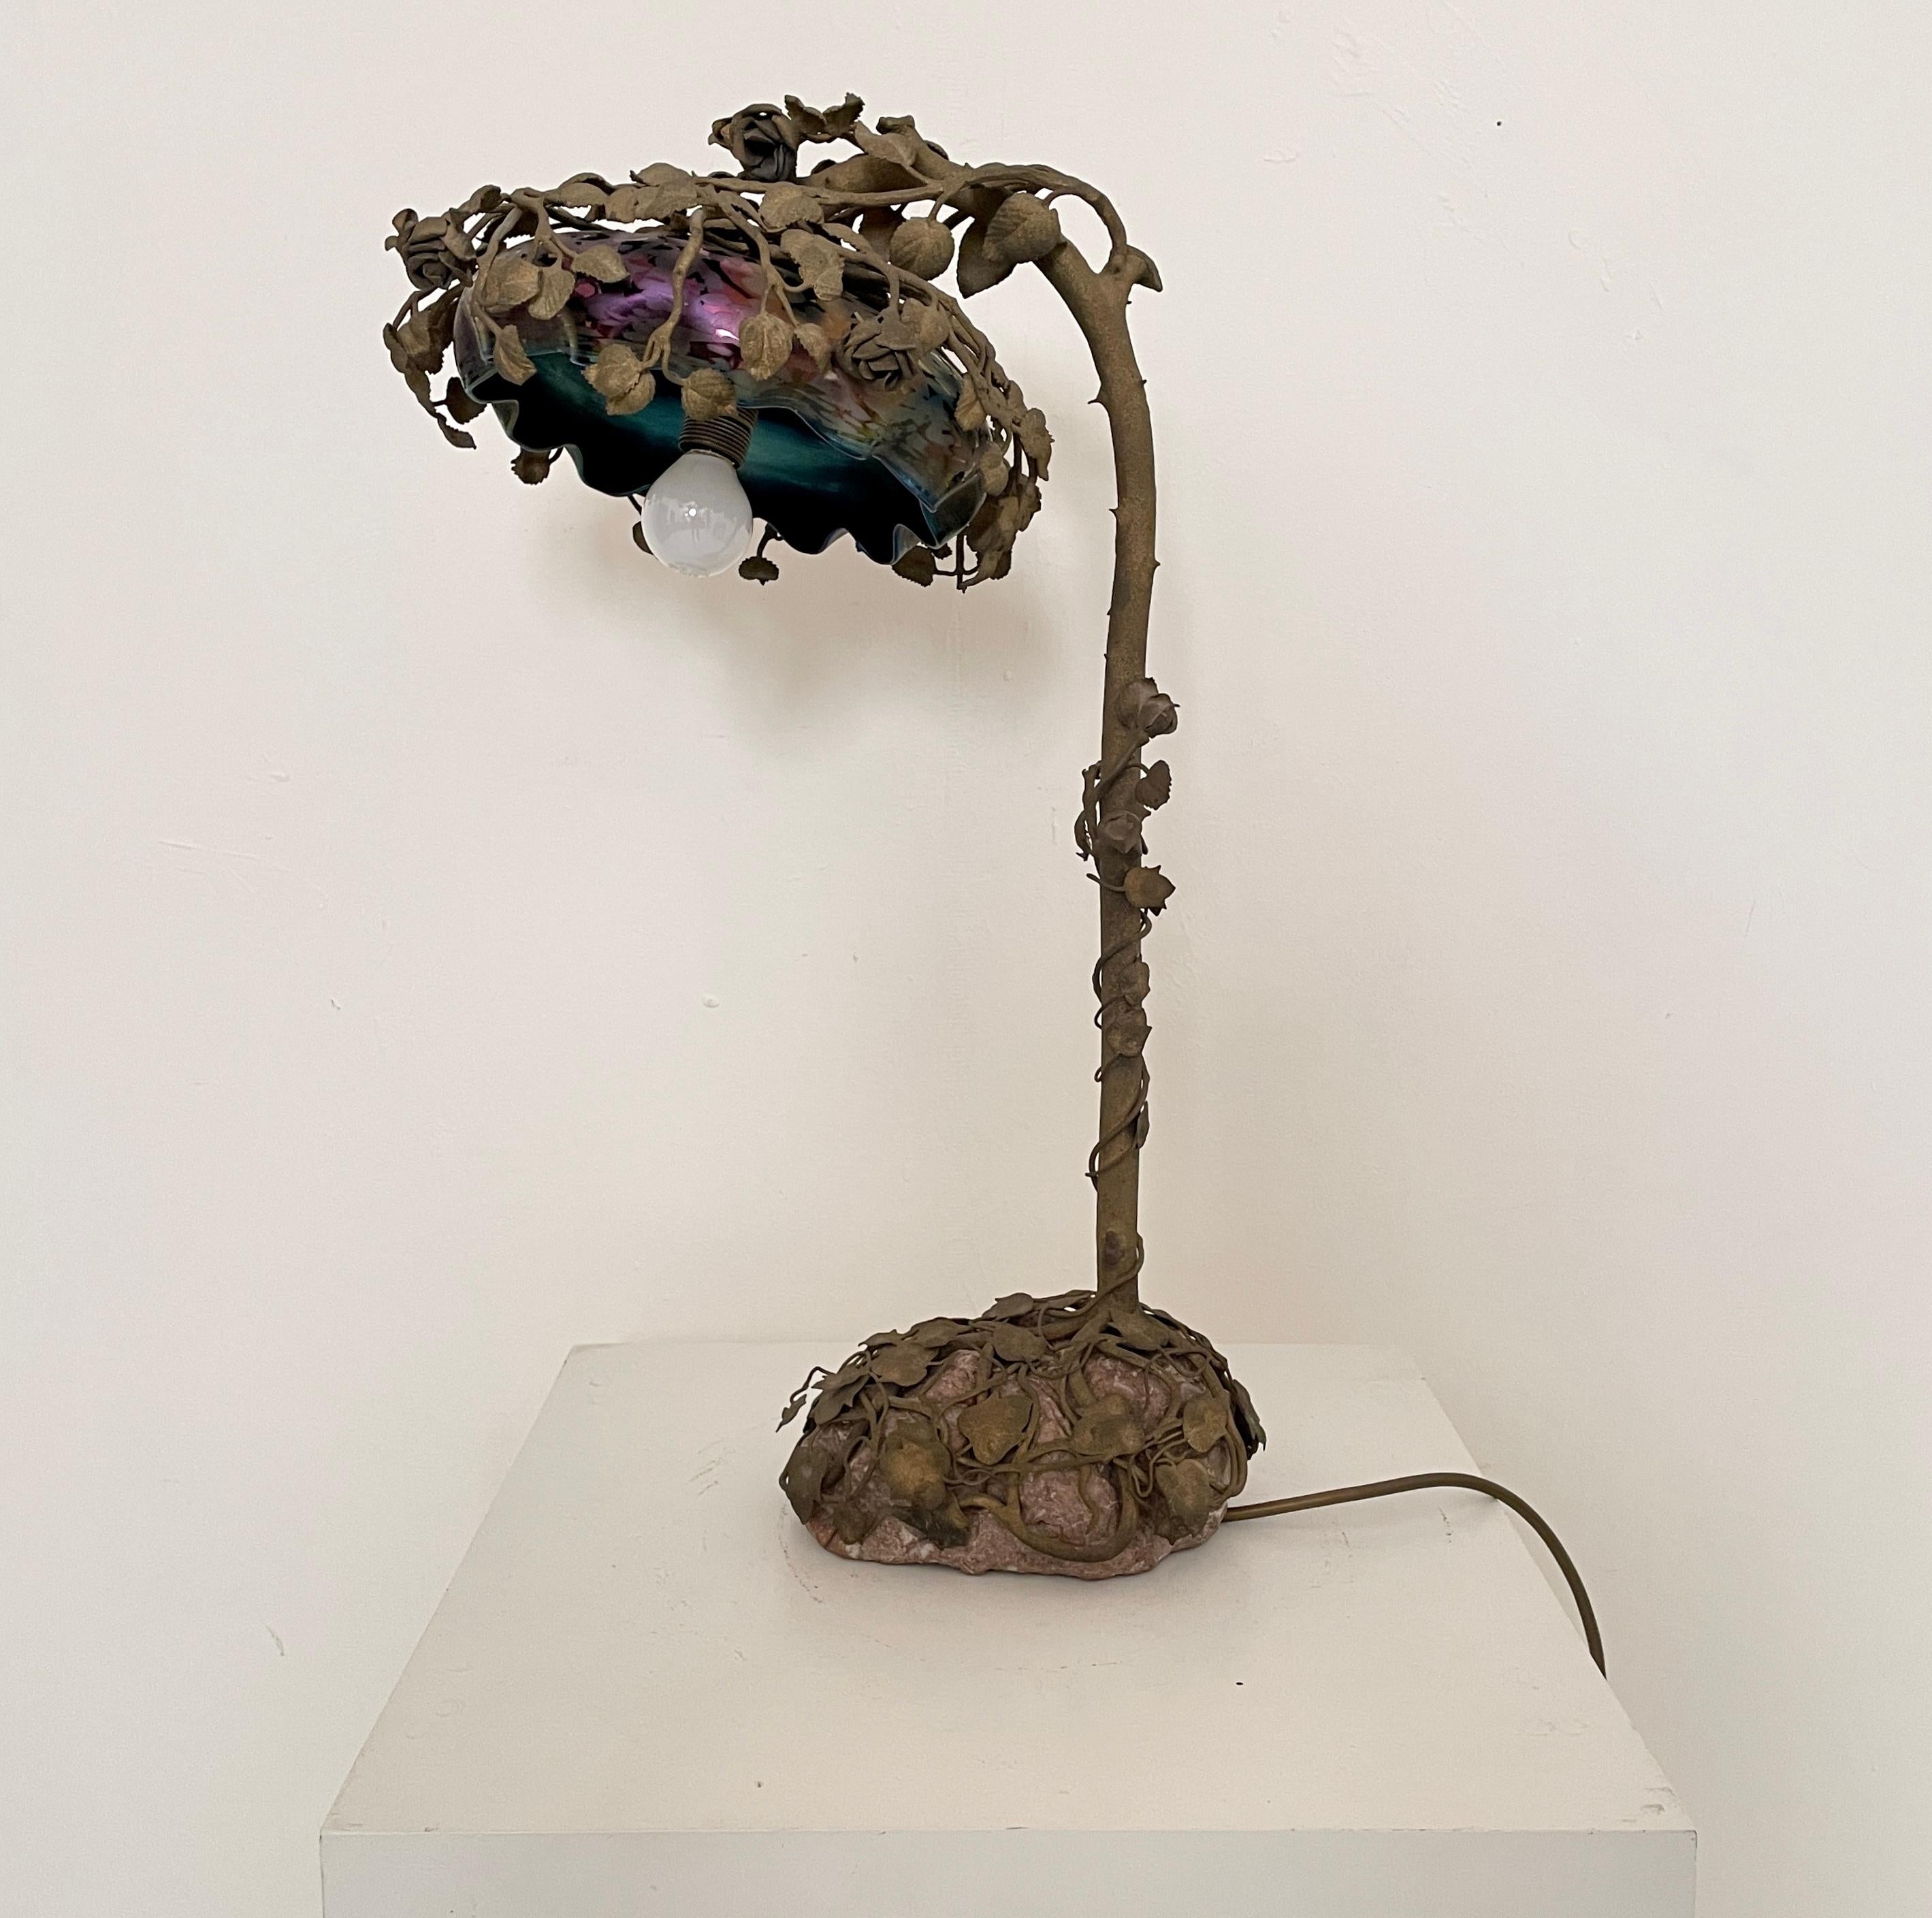 French Art Nouveau Table Lamp Cast Bronze Rose Tree, Enameled Glass, Around 1910 In Good Condition For Sale In Berlin, DE